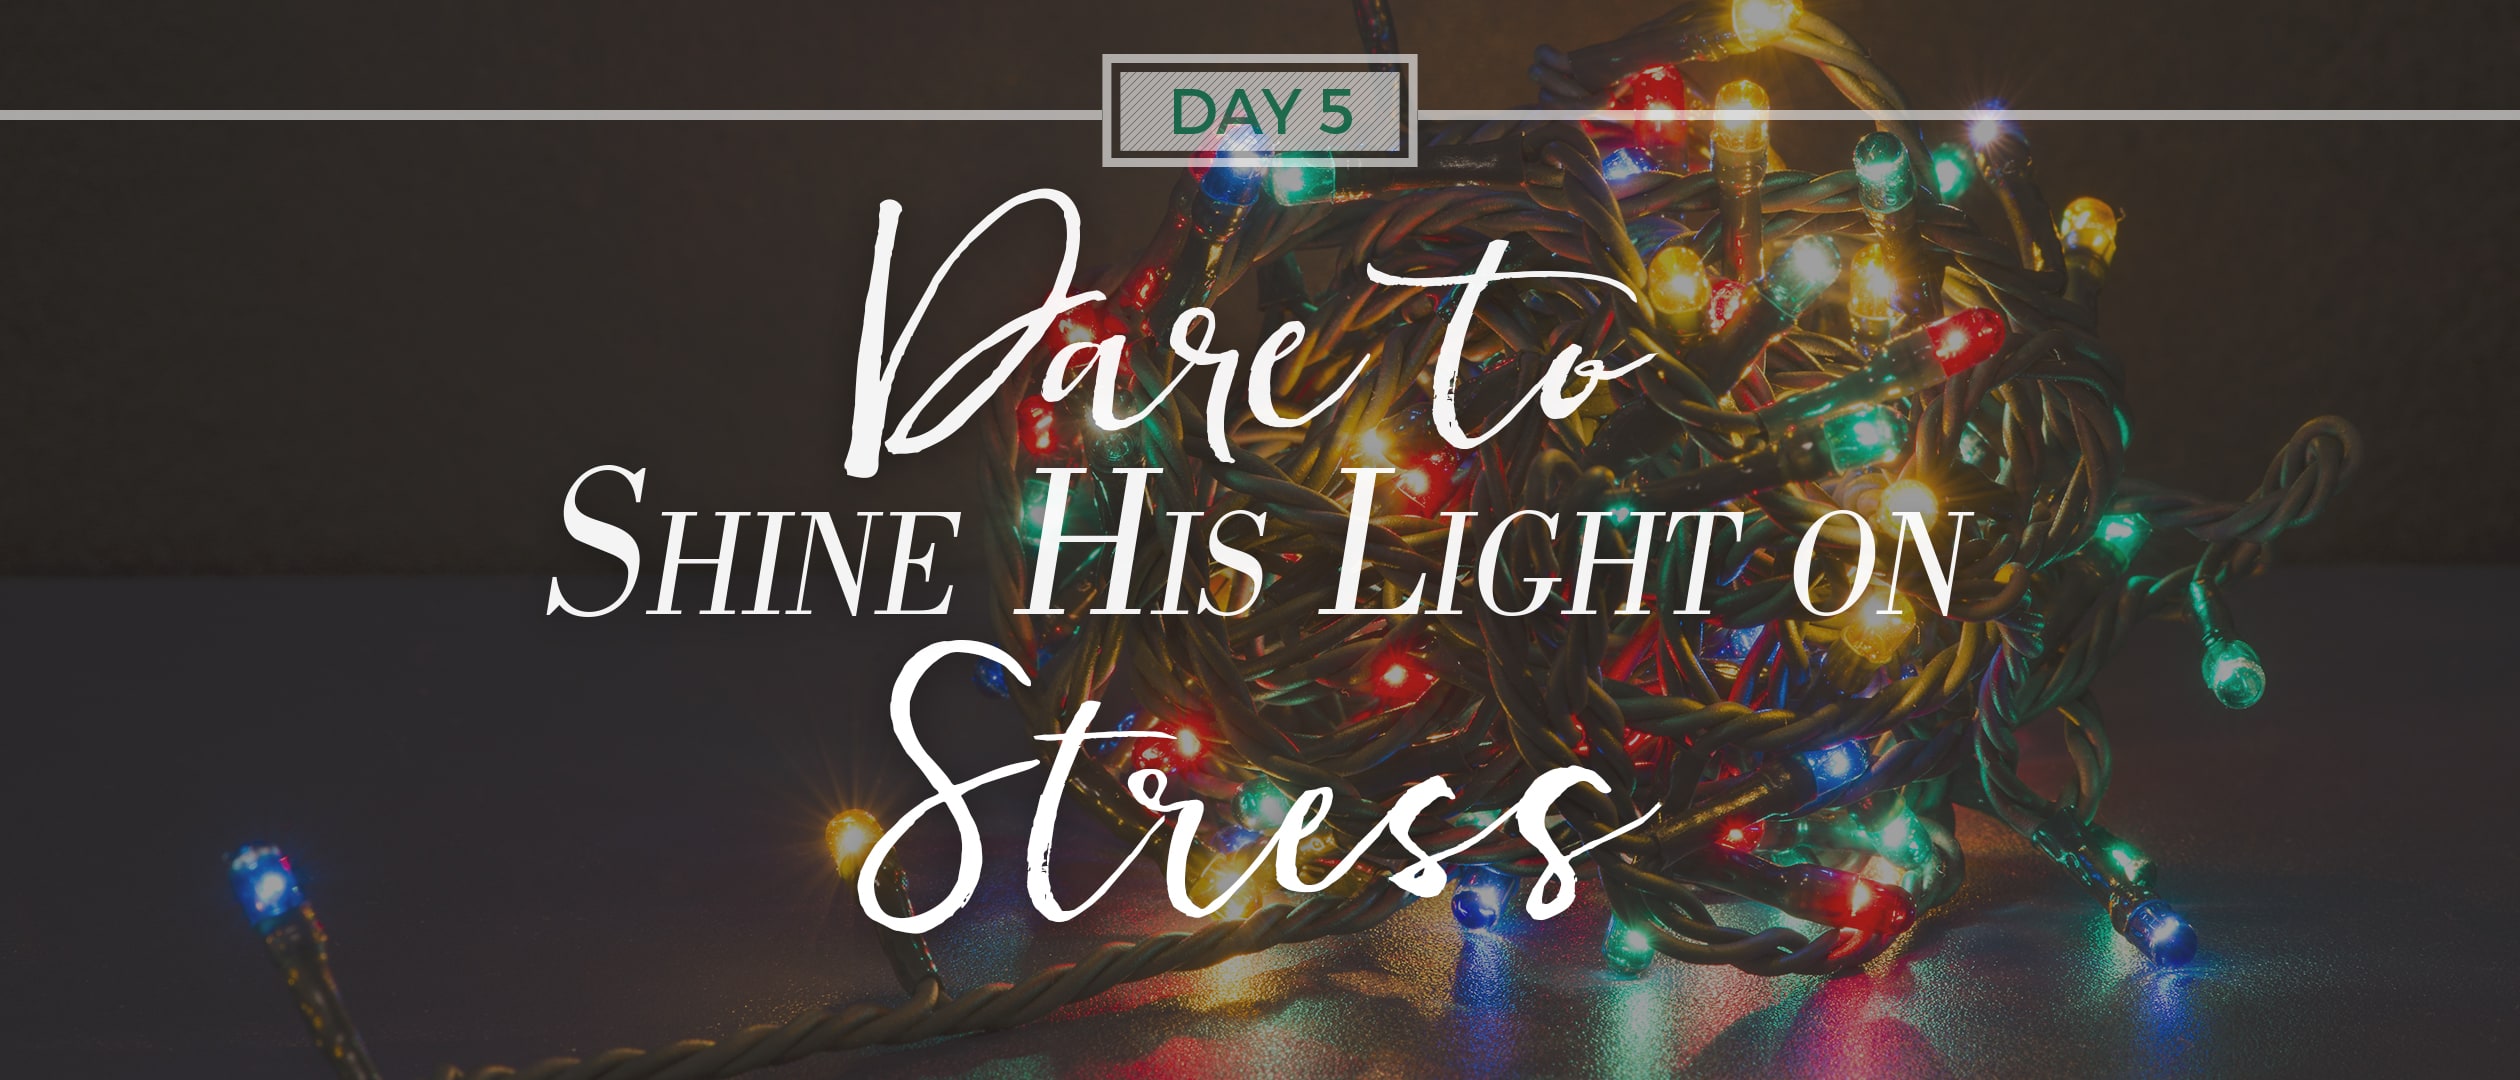 Day 5: Dare to Shine His Light on Stress